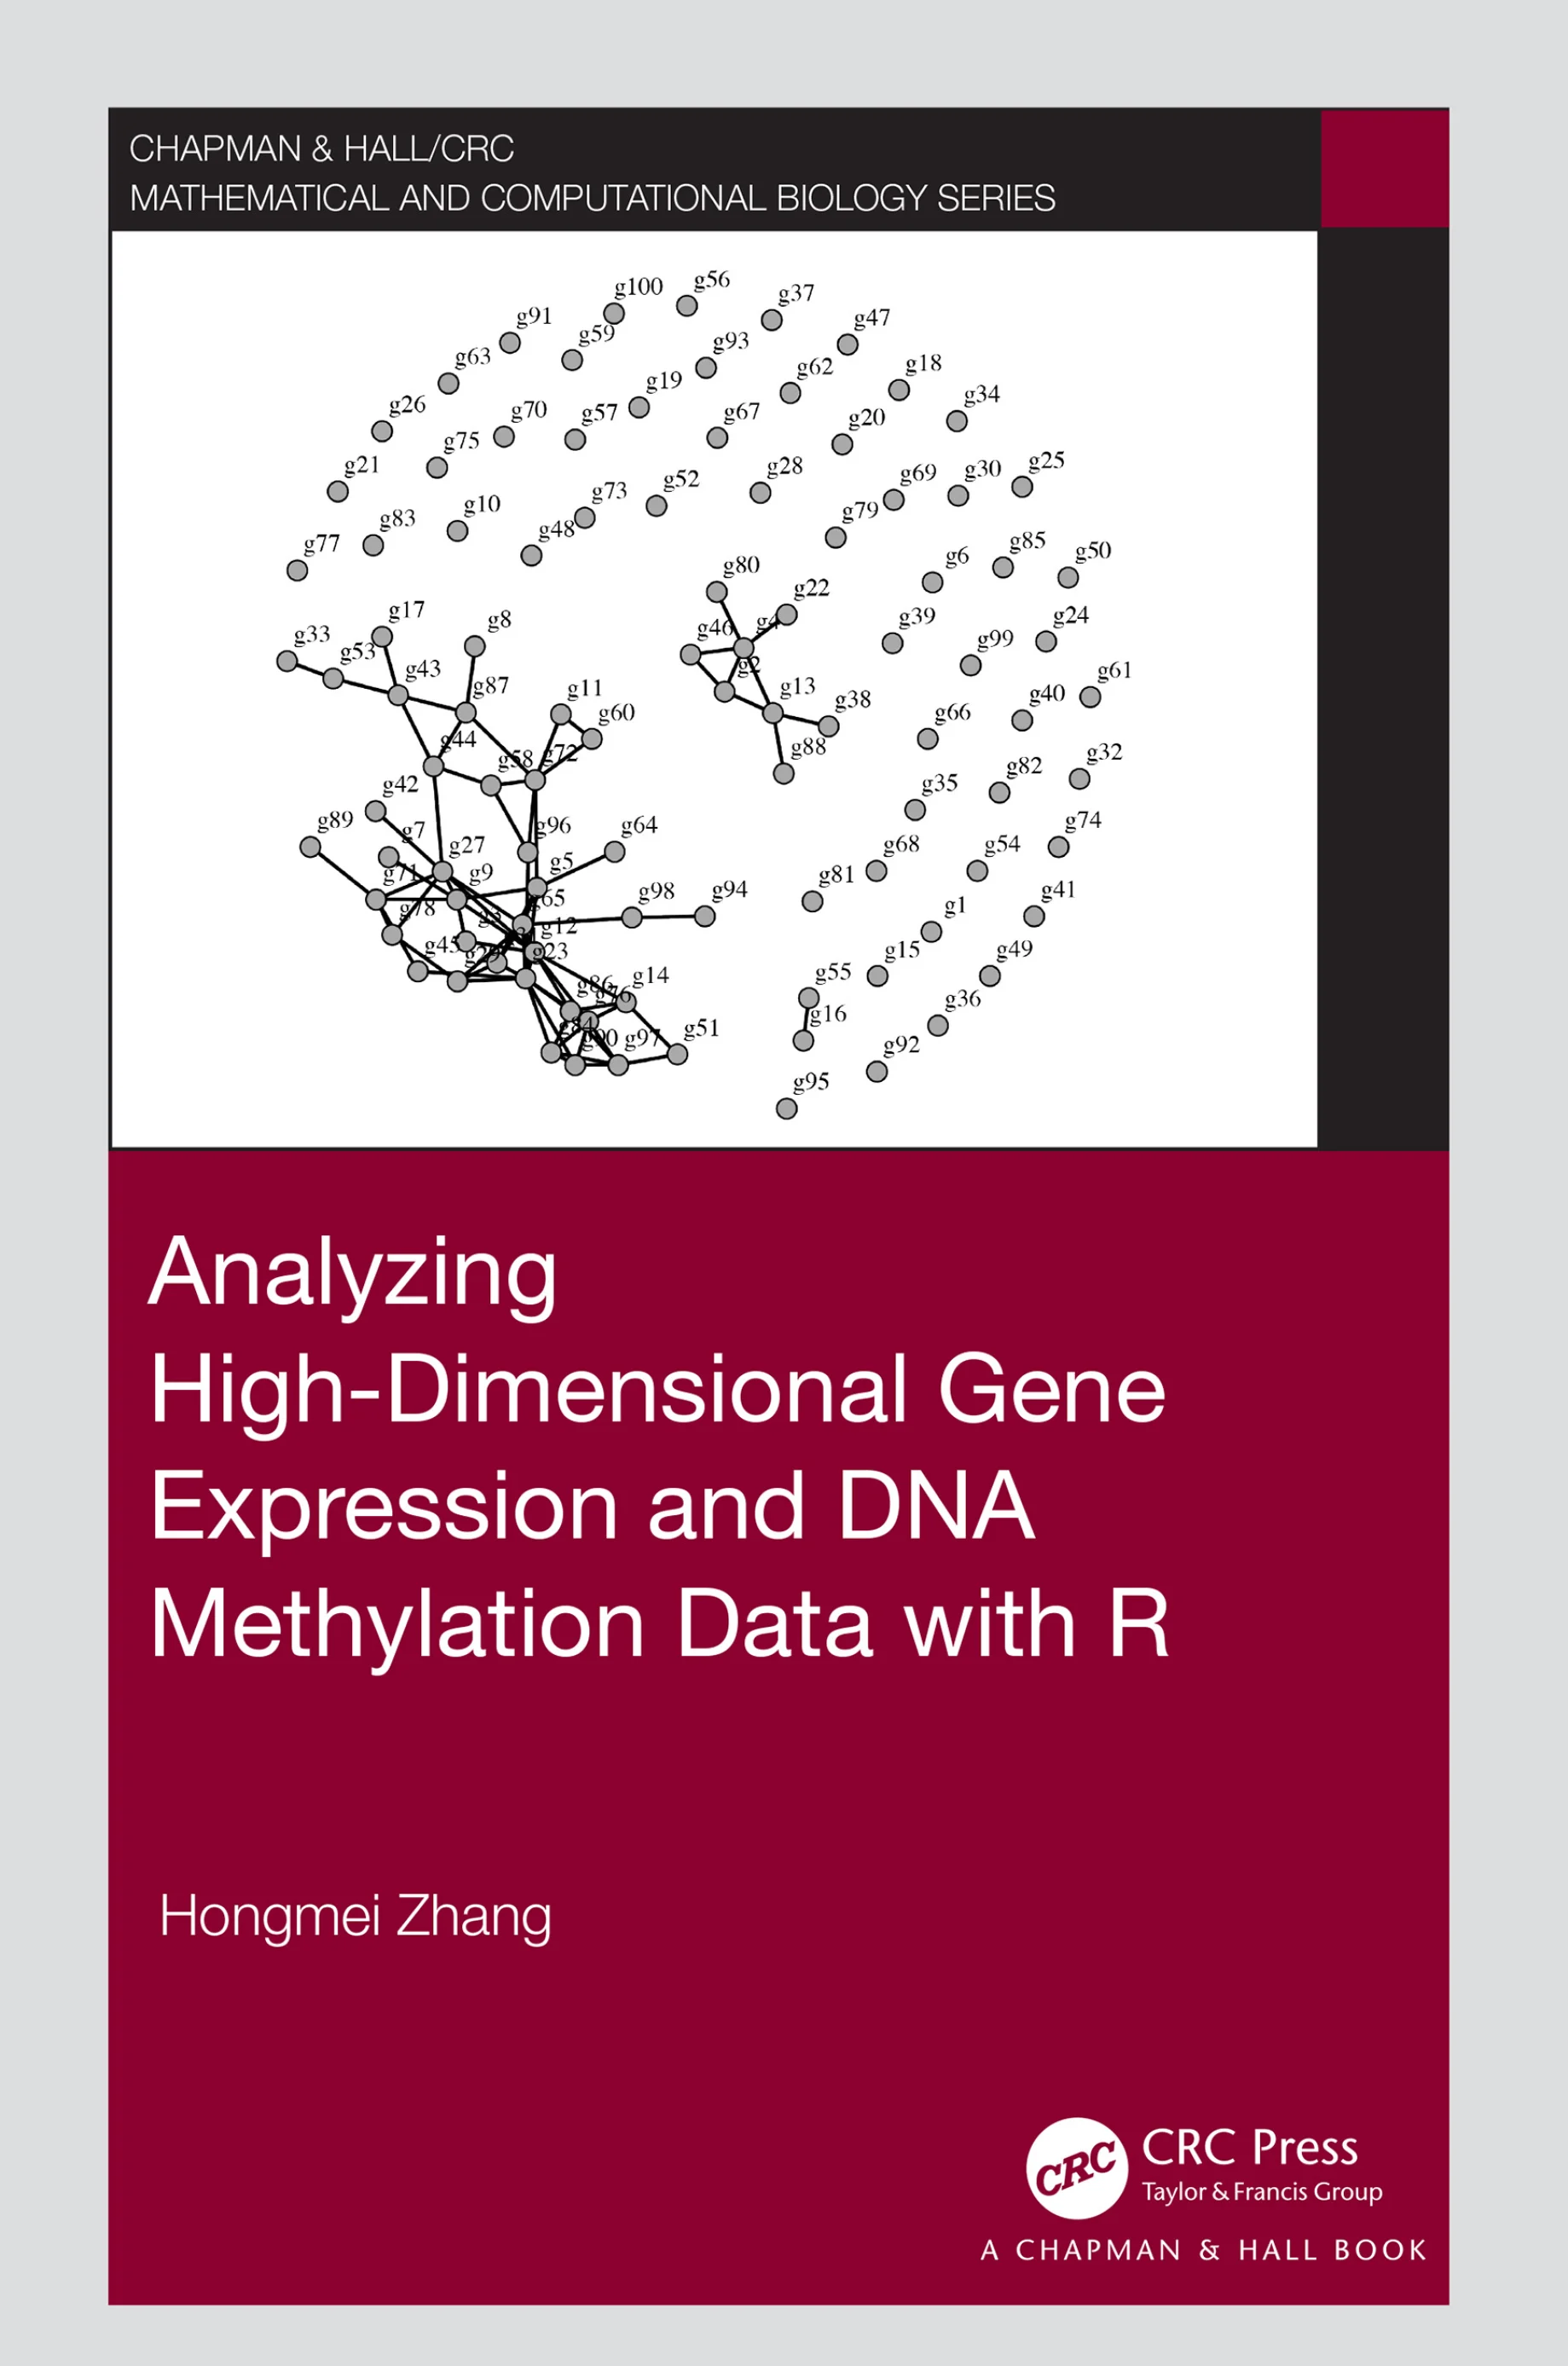 Analyzing High-Dimensional Gene Expression and DNA Methylation Data with R image